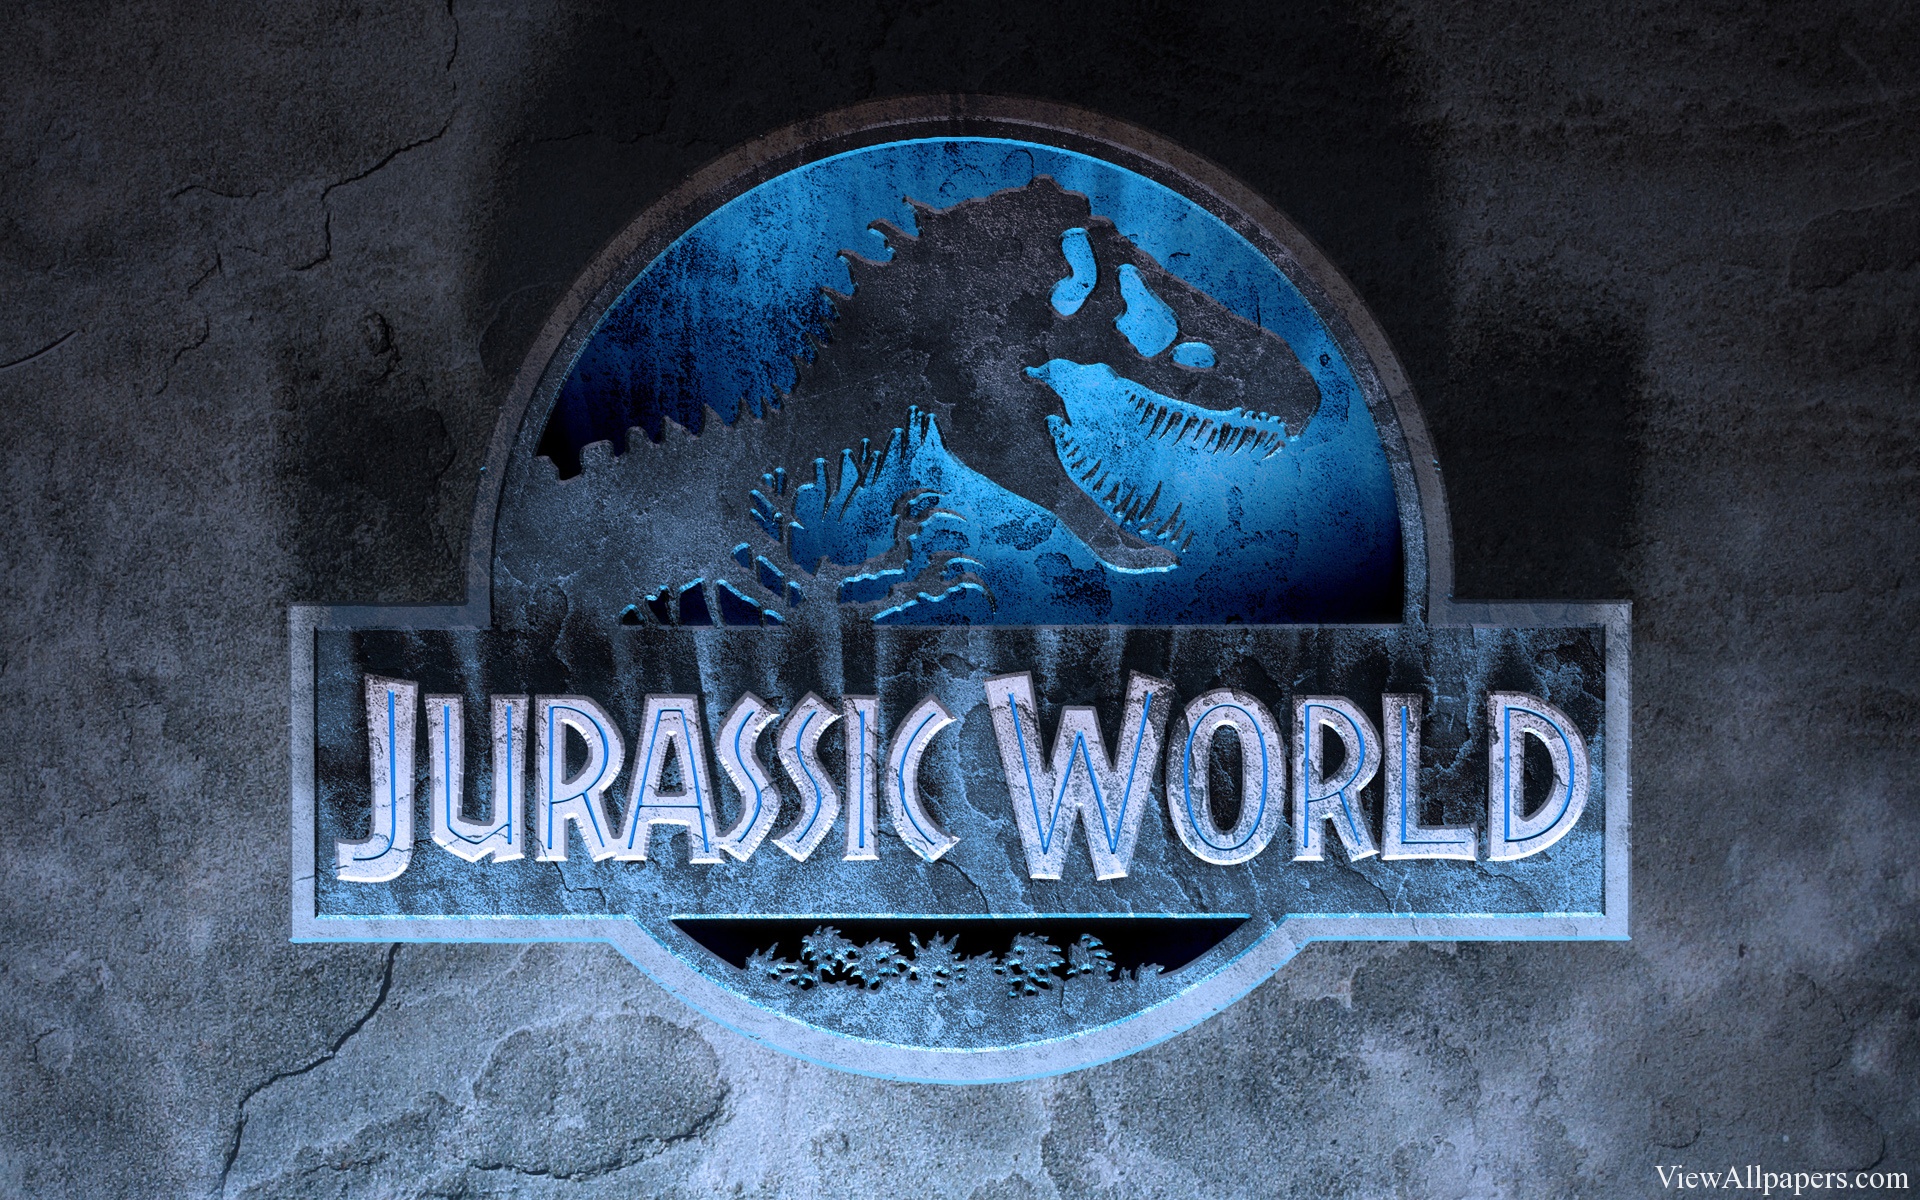 free for ios download Jurassic World: Dominion